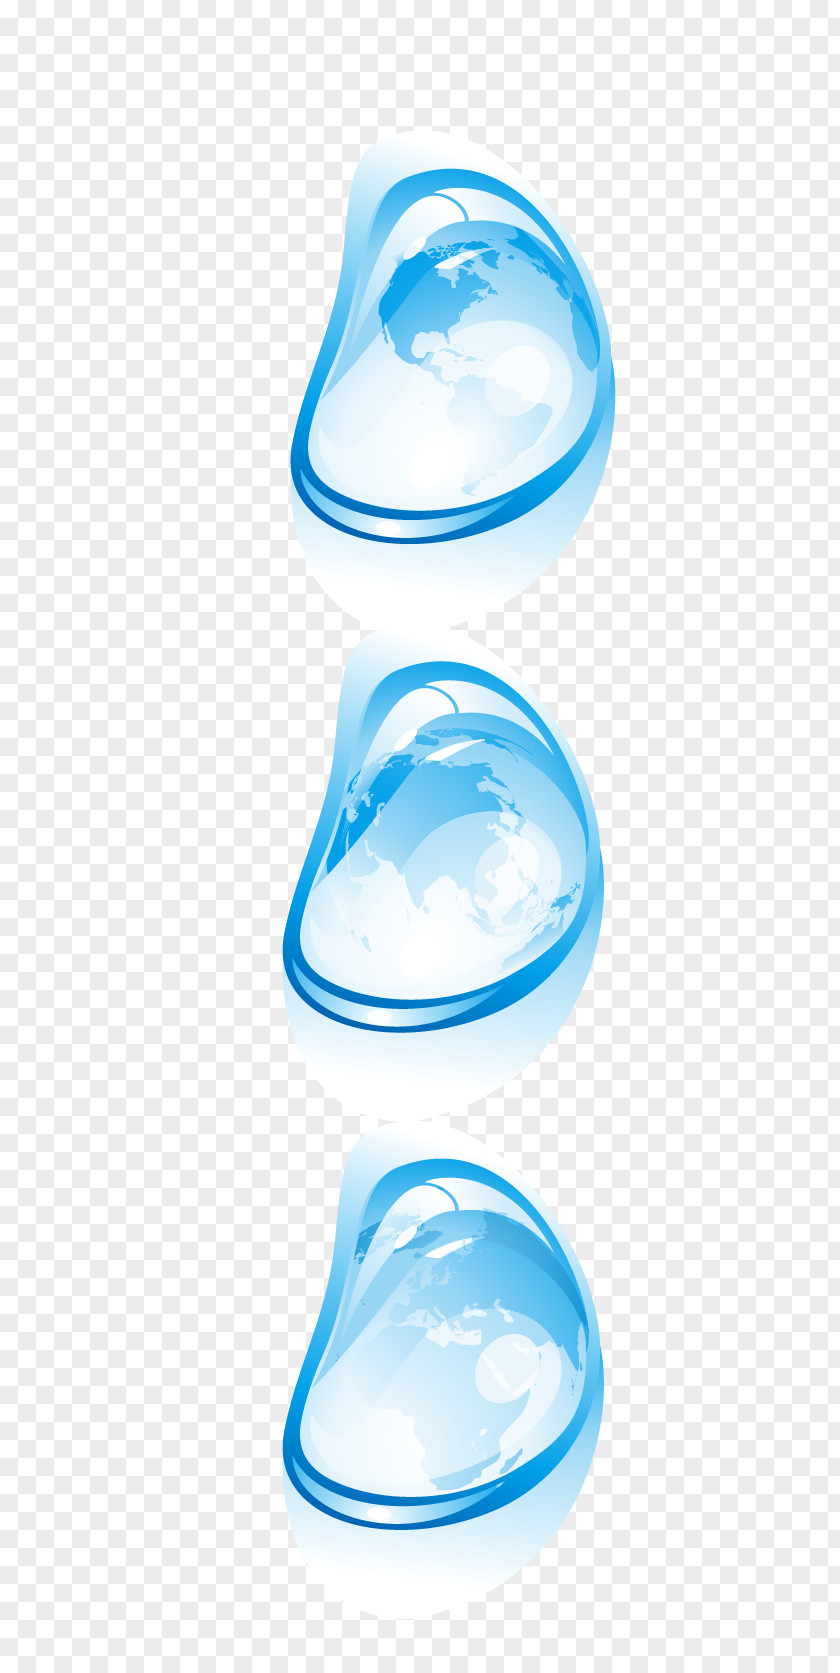 Textured Water Droplets Earth Drop Euclidean Vector PNG